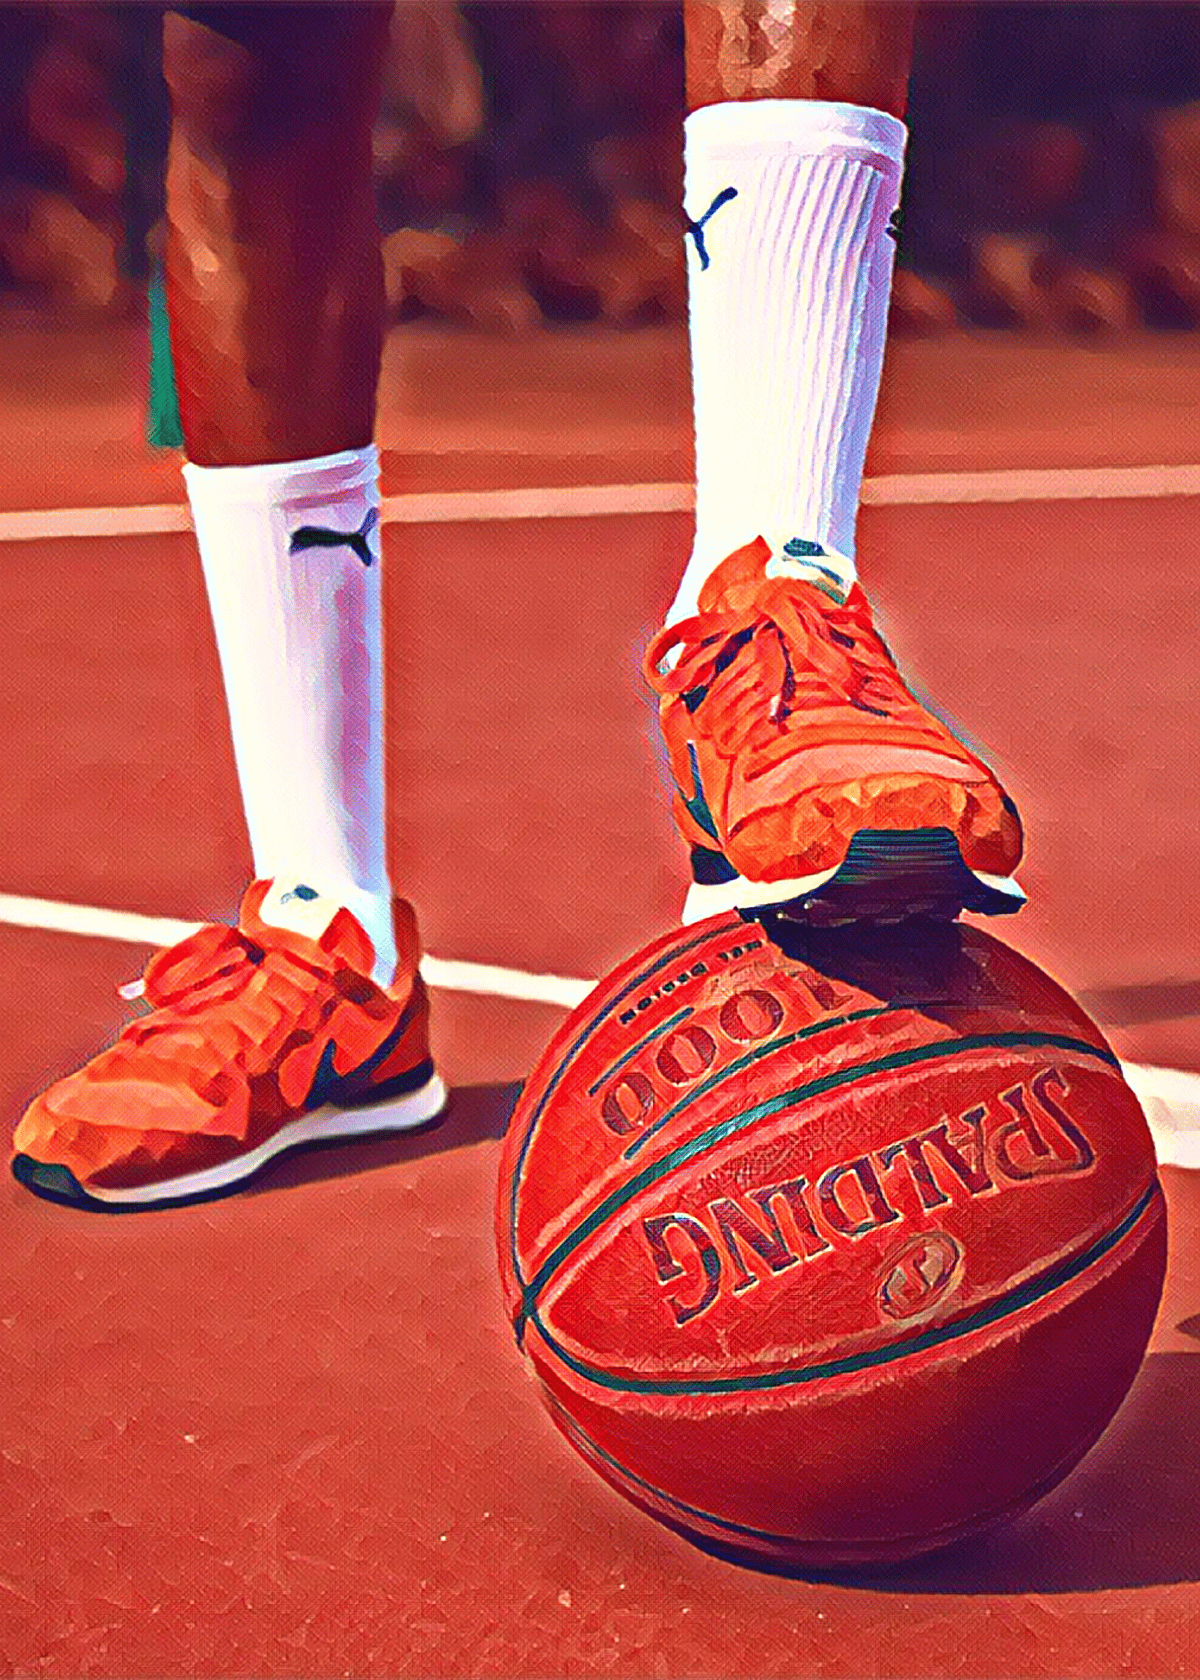 A Perfect Fit - The BEST Low Top Basketball Shoes